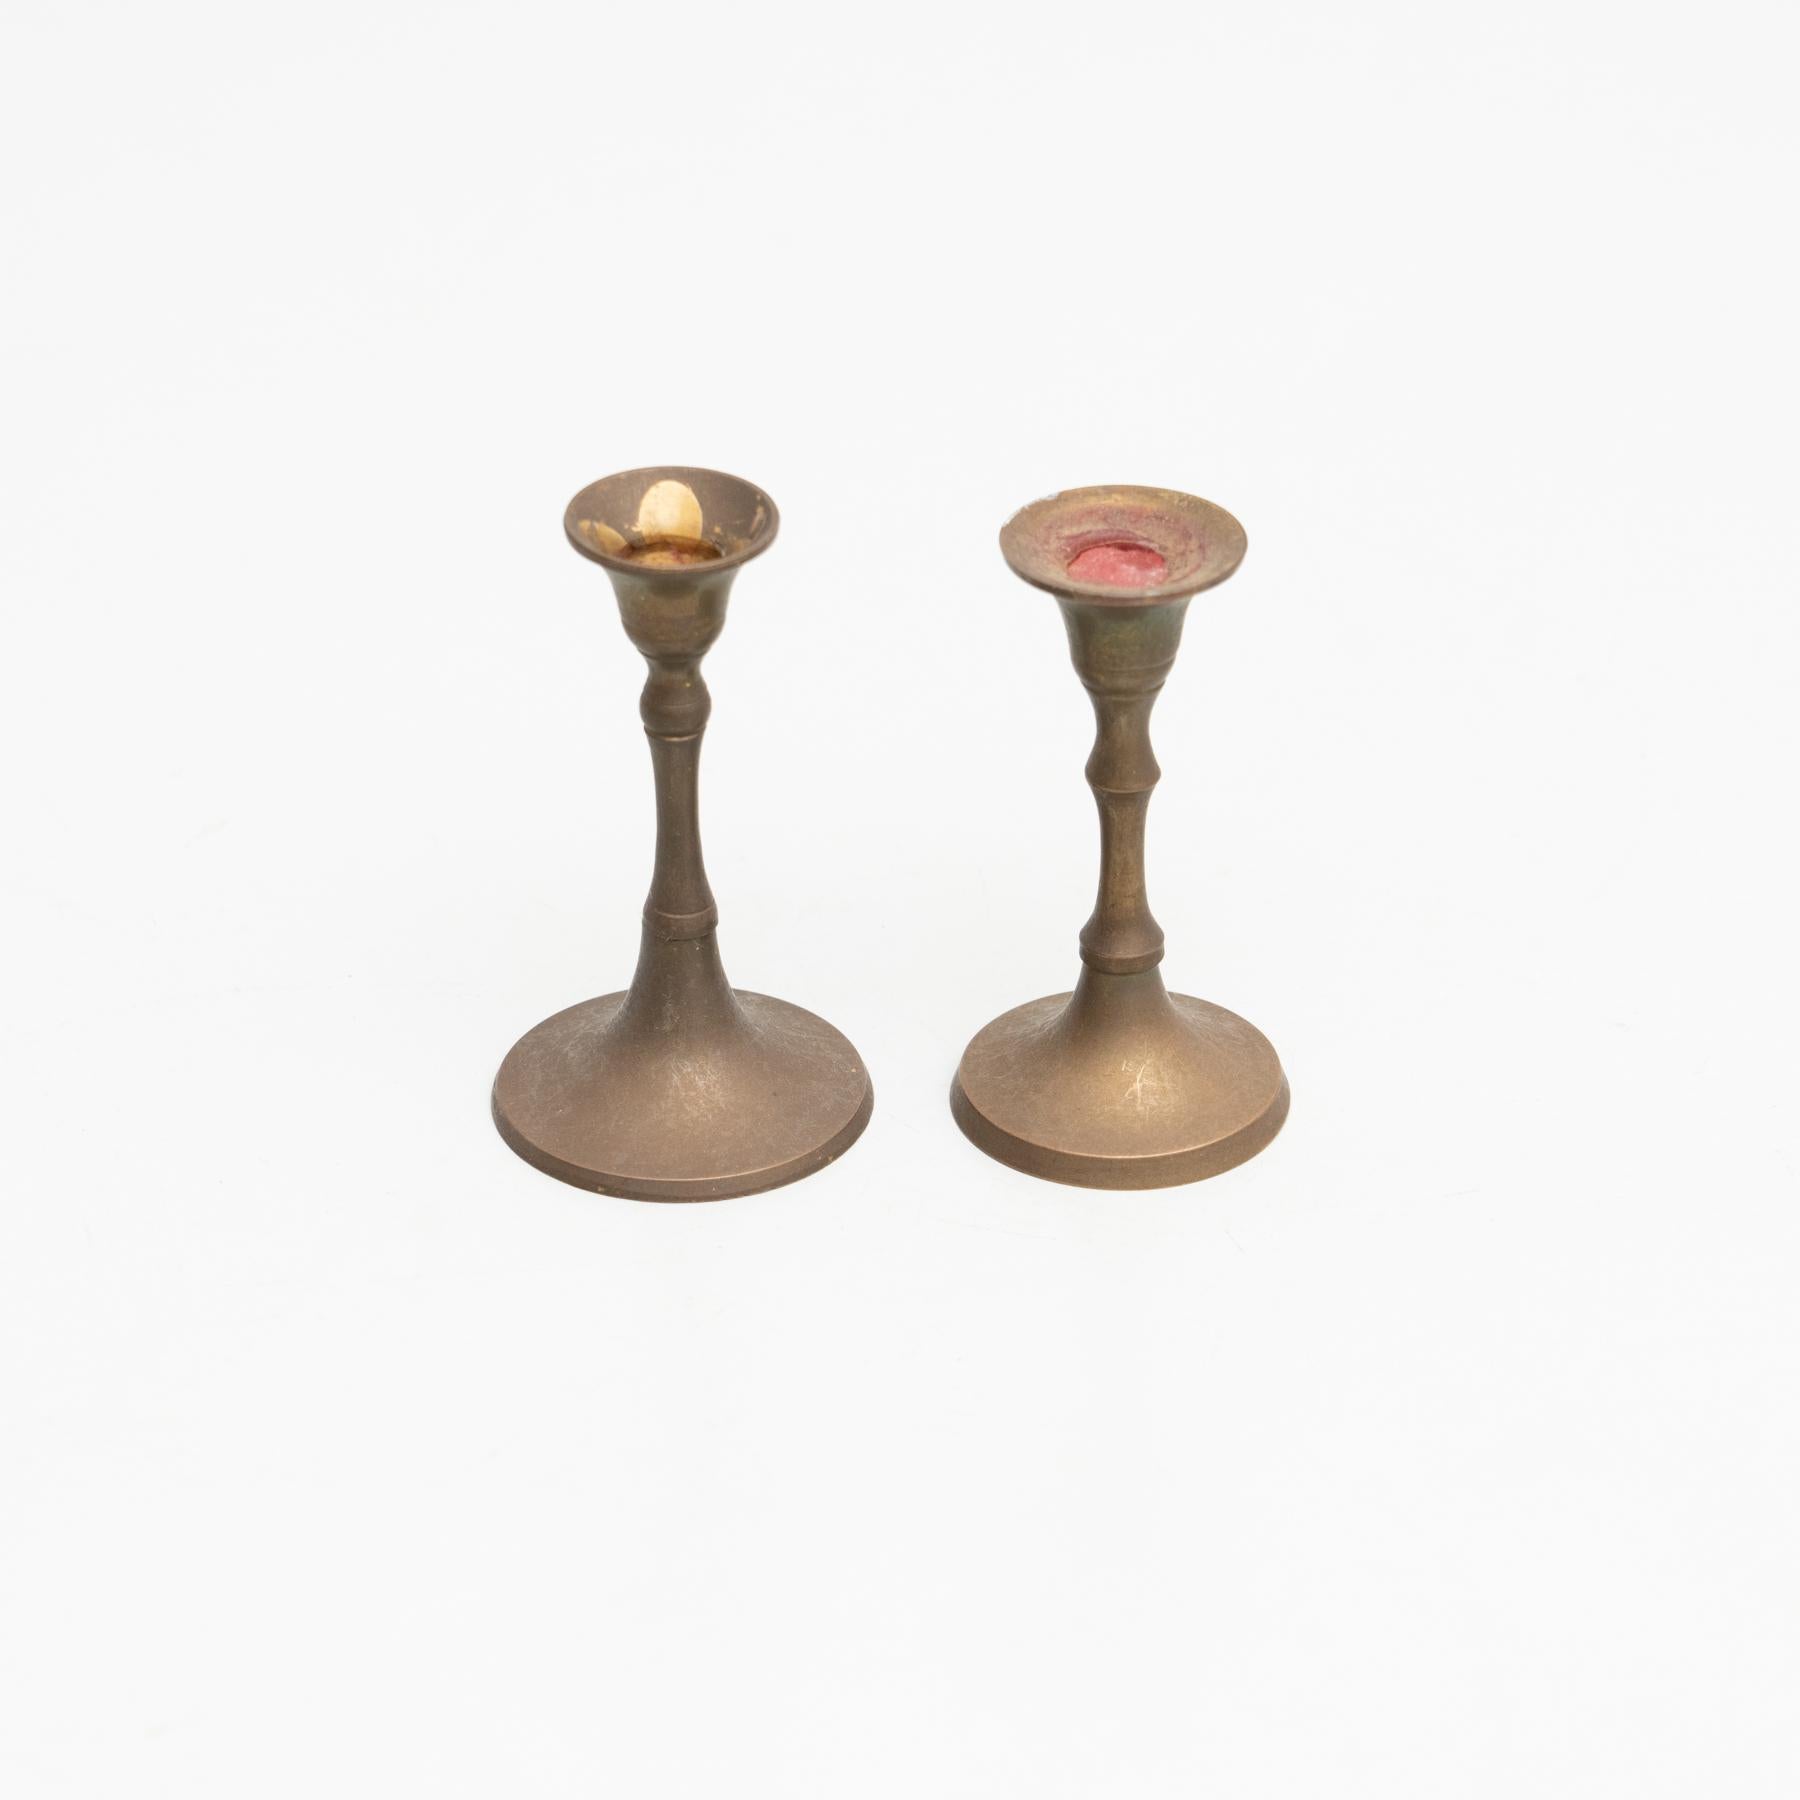 Other Set of Two Small Candle Holders, circa 1950